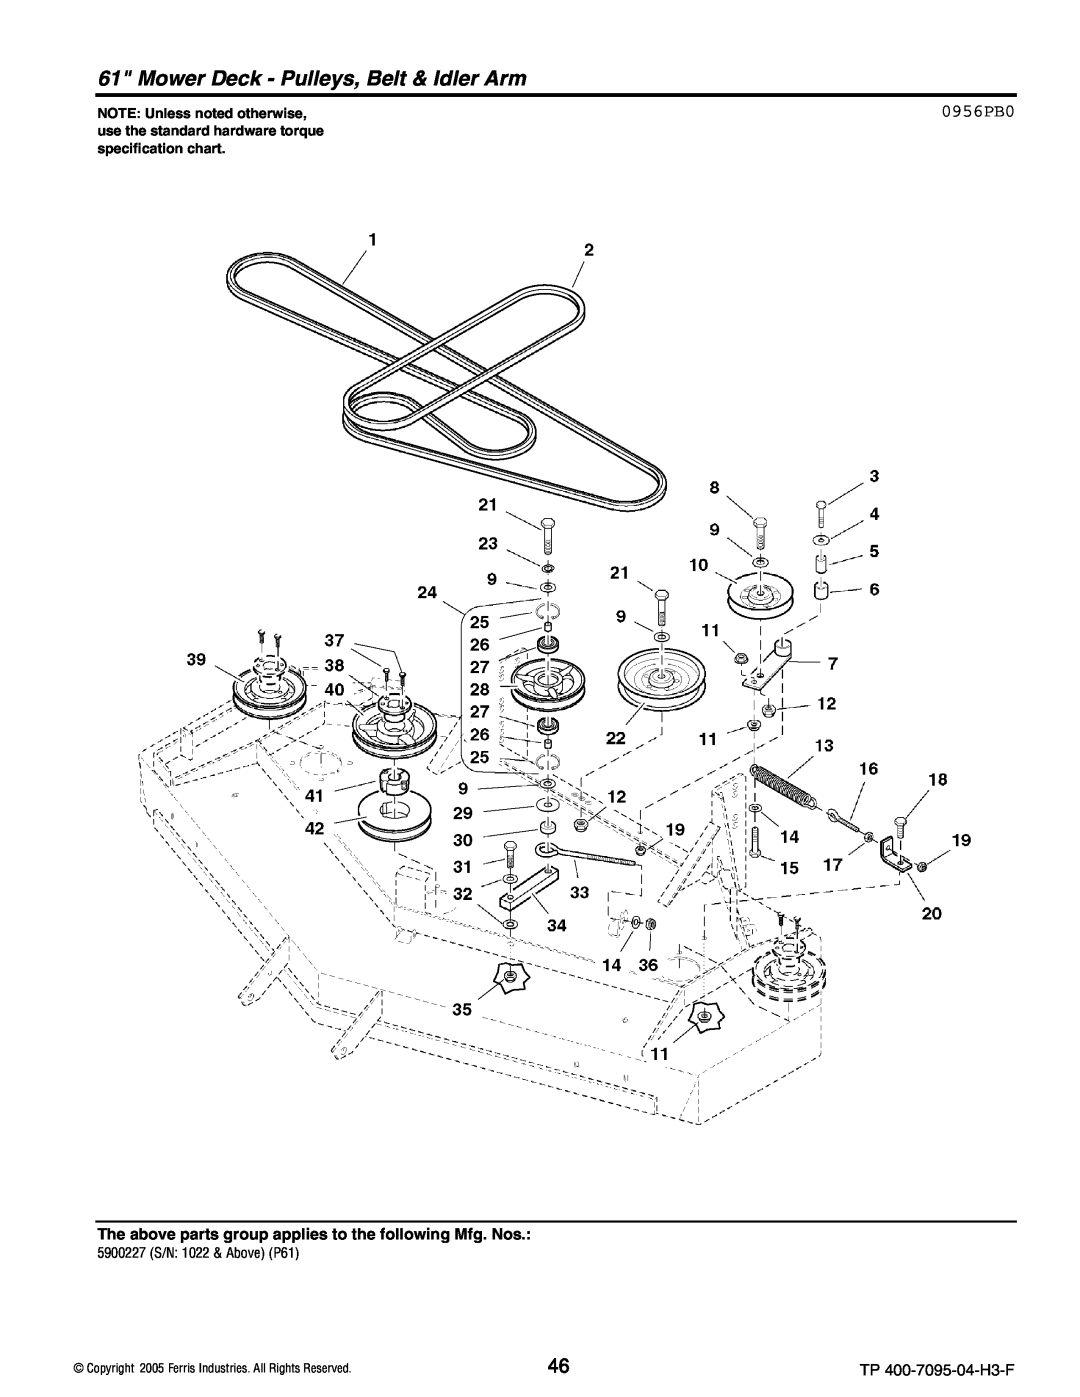 Ferris Industries 5900228, 5901036, 5901035 Mower Deck - Pulleys, Belt & Idler Arm, 0956PB0, NOTE Unless noted otherwise 